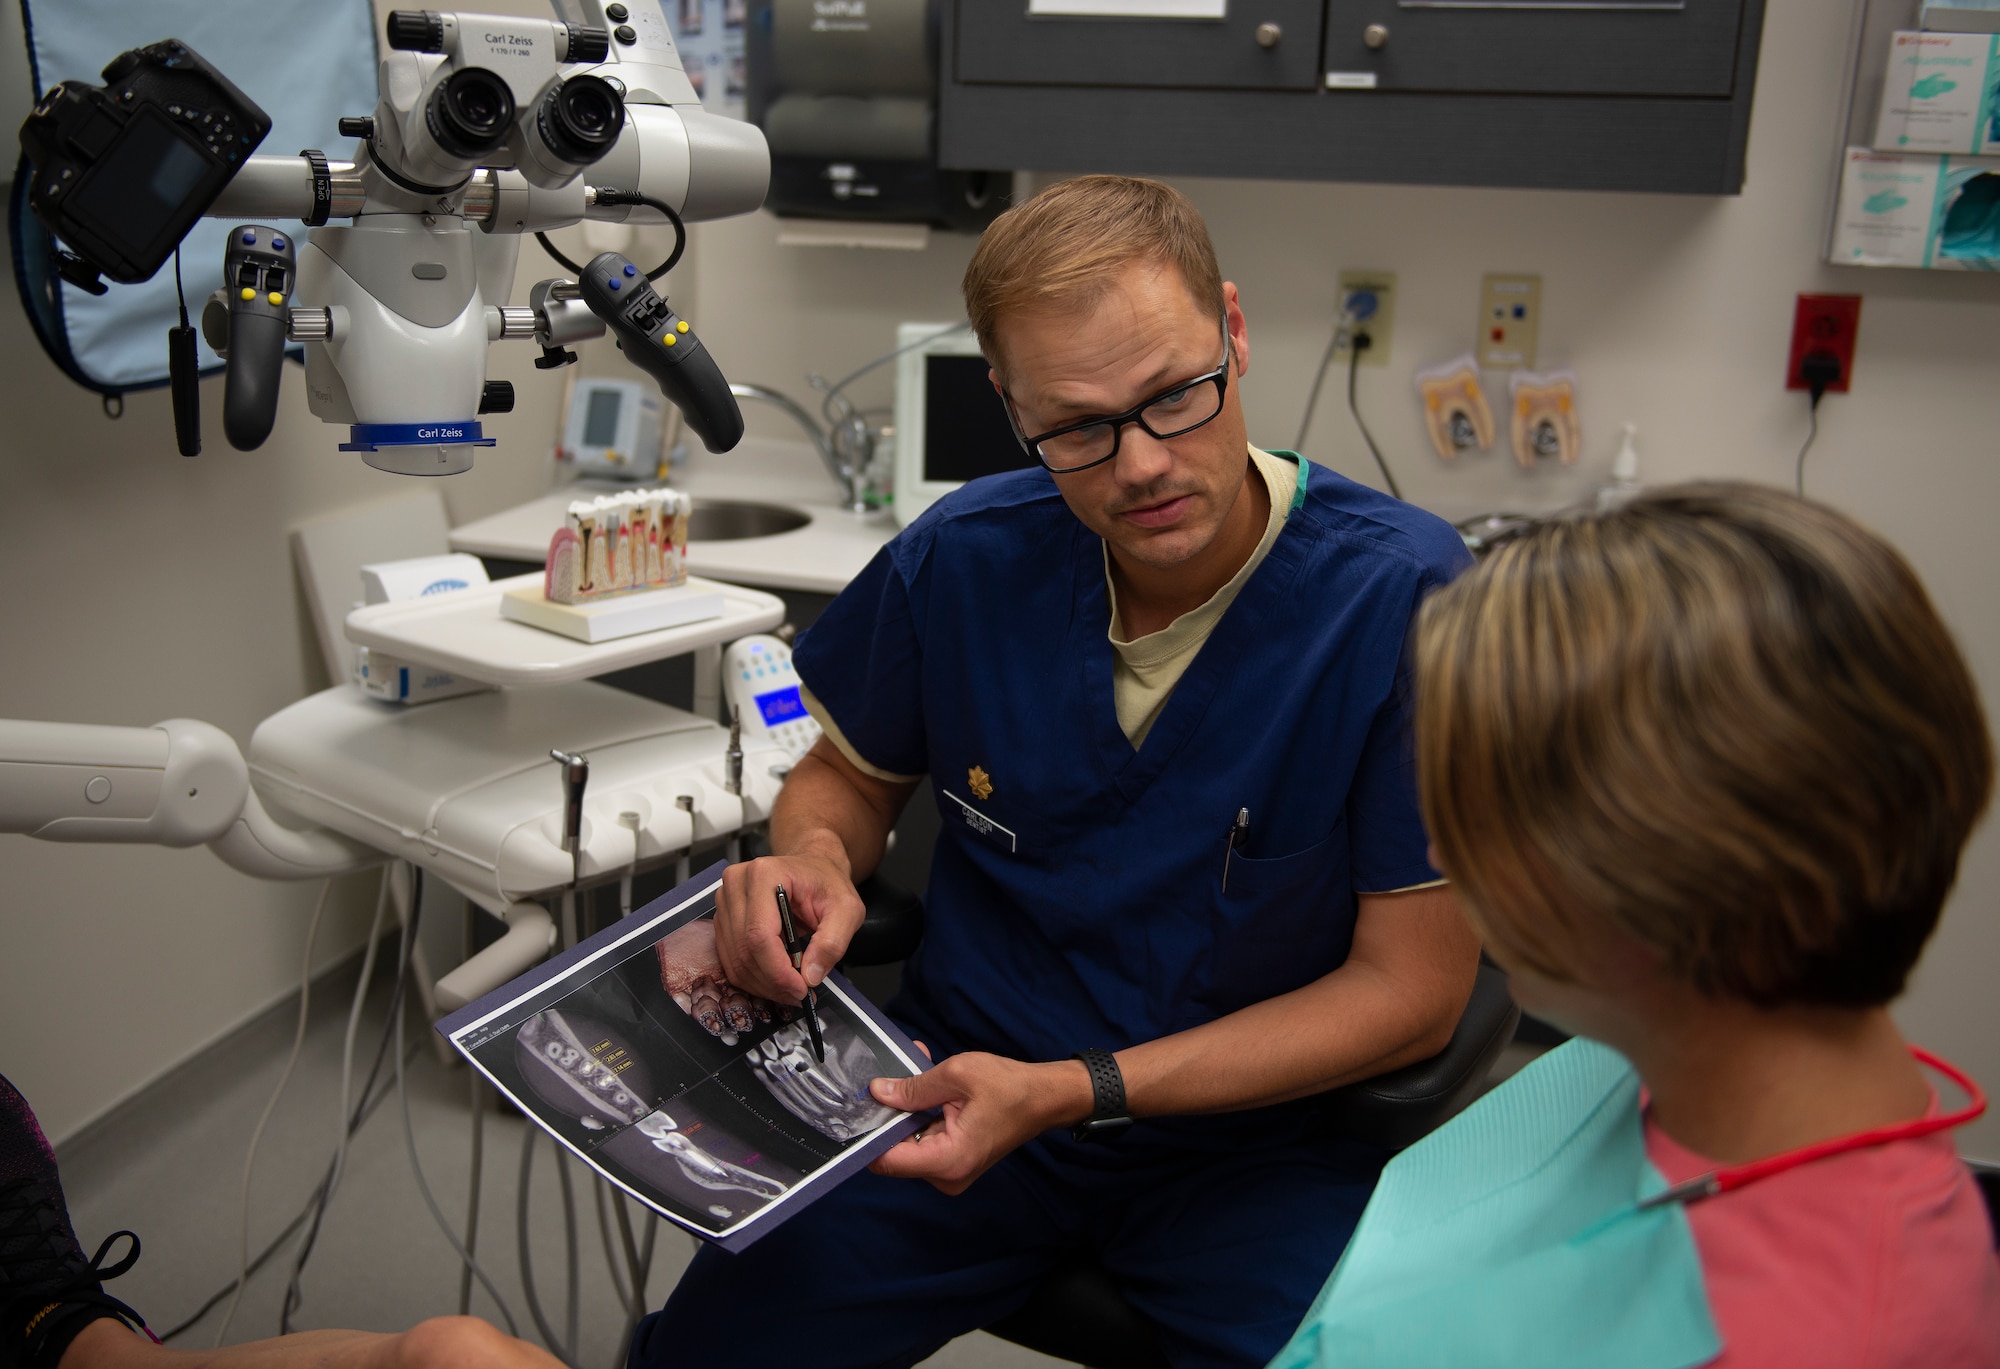 U.S. Air Force Maj. Timothy Carlson, 81st Dental Squadron endodontic resident, explains the root canal procedure to Regina Yarbrough, patient, in the Keesler Dental Clinic here, June 11, 2019. Carlson ensures his patient understands the procedure as well as other options, so they may make an informed decision. (U.S Air Force photo by Airman 1st Class Kimberly Mueller)